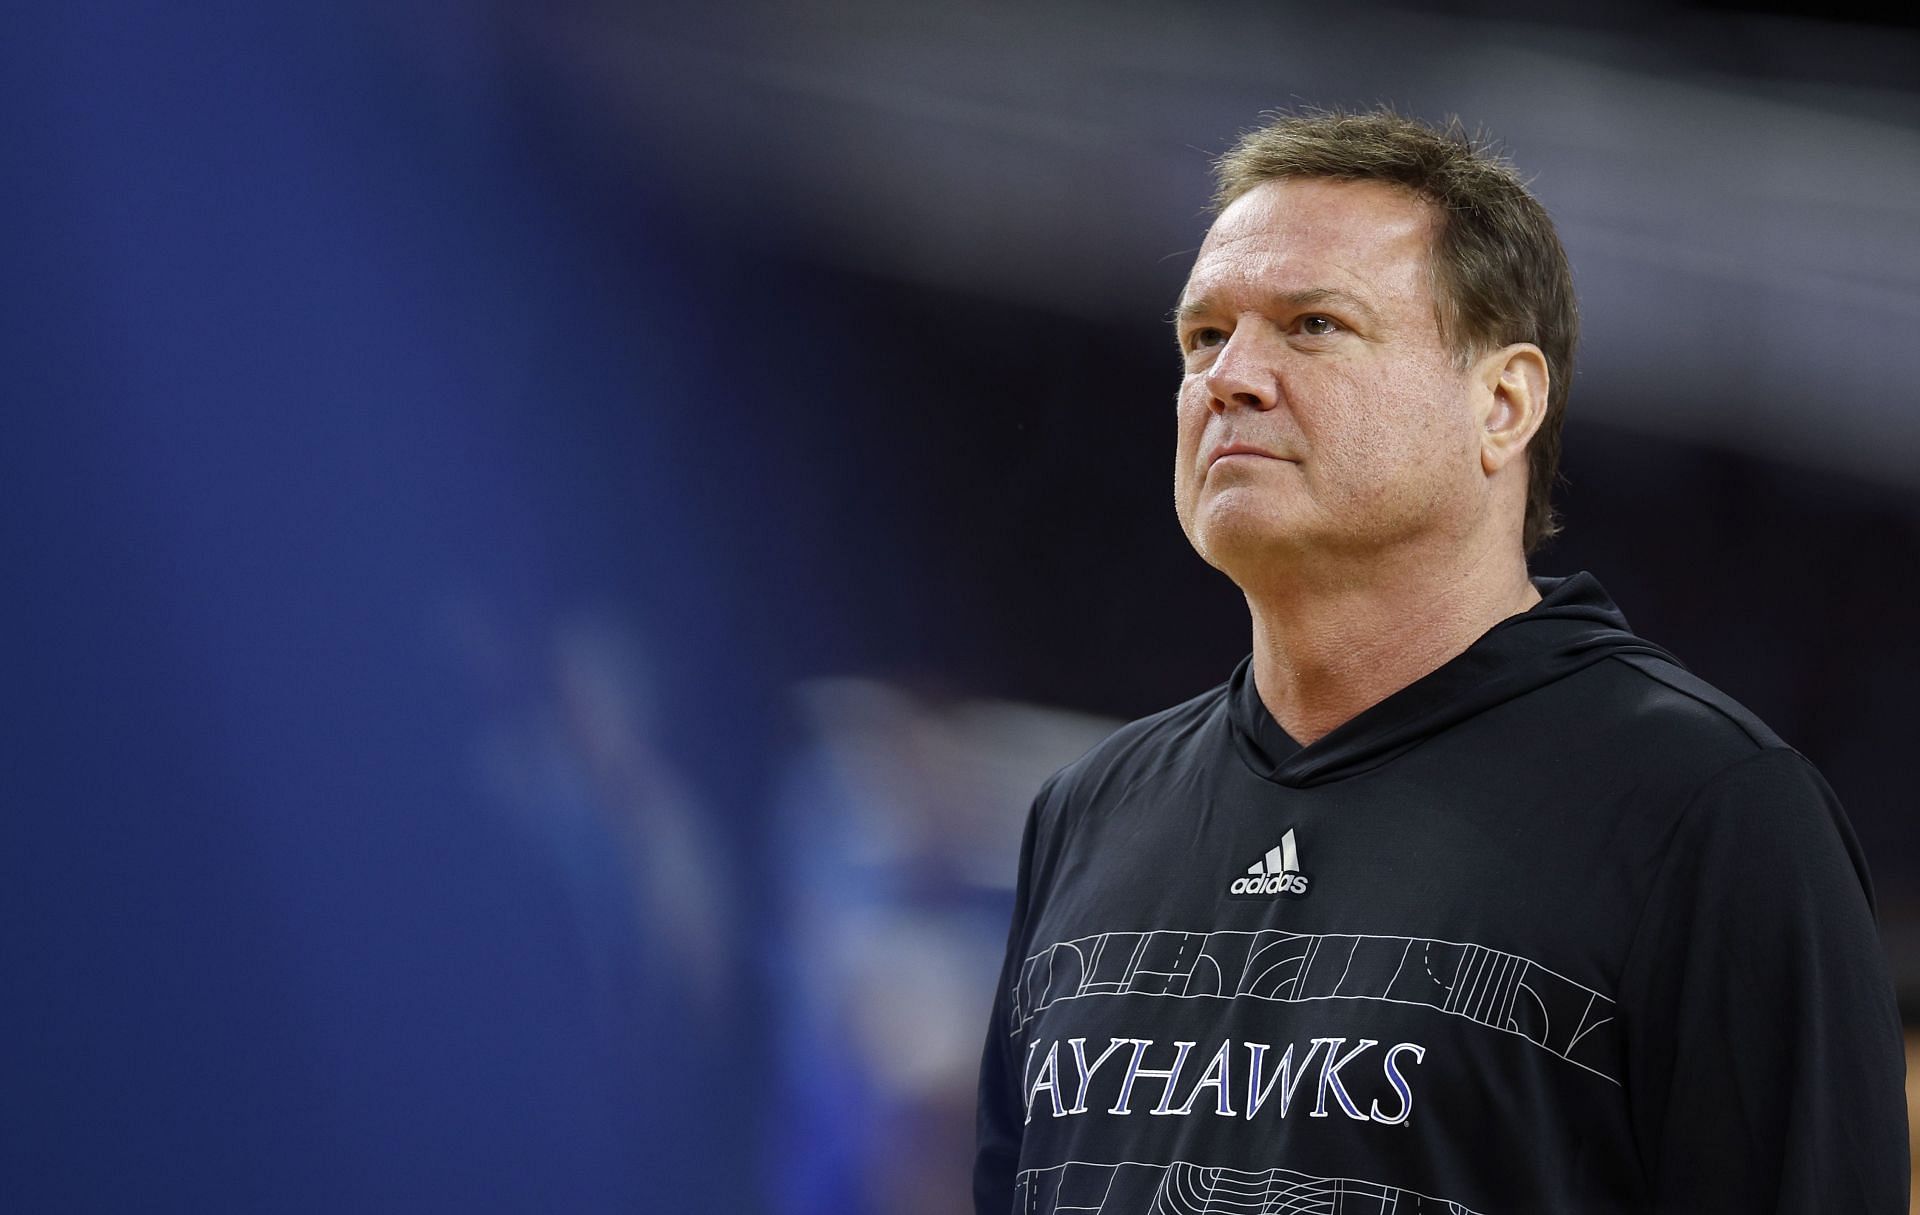 Kansas Jayhawks coach Bill Self looks to lead his team to the national championship